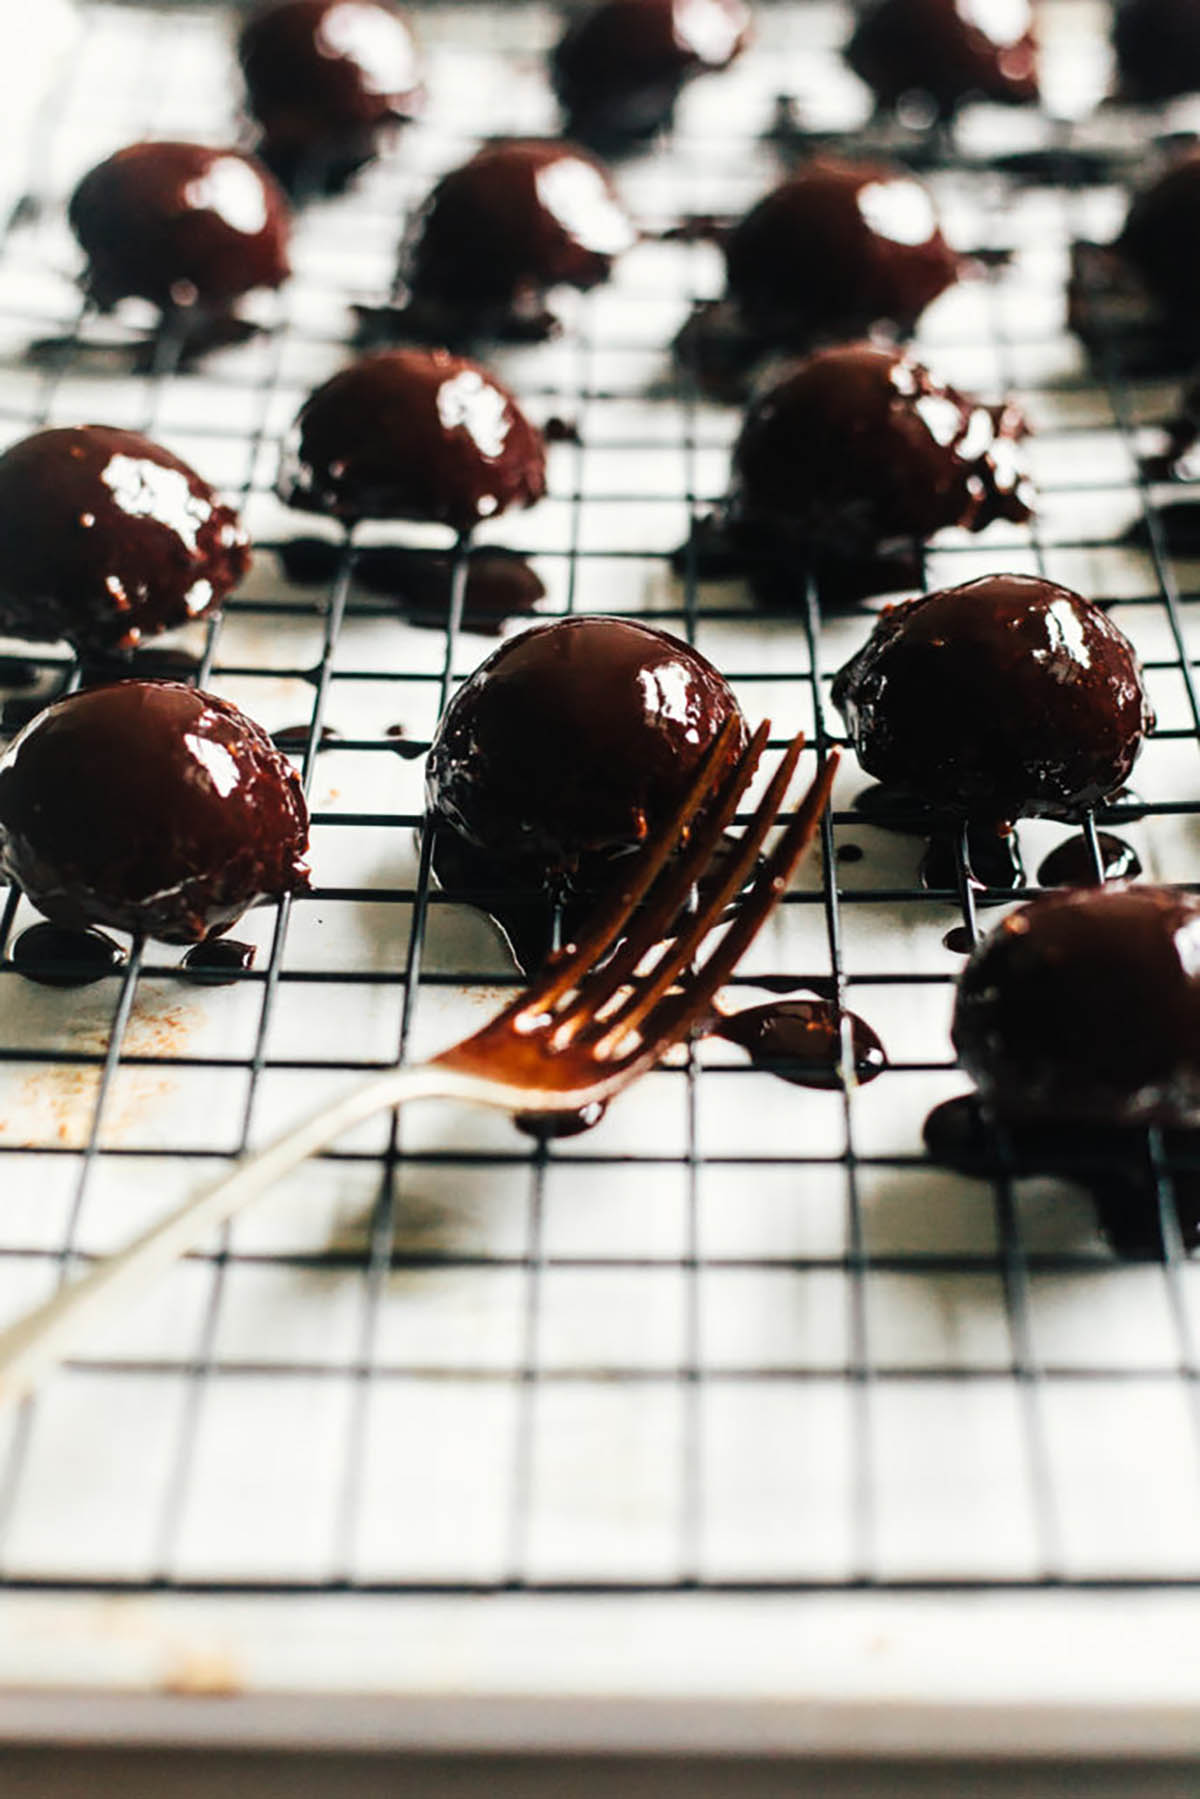 Several round treats covered in melted chocolate on a wire rack.